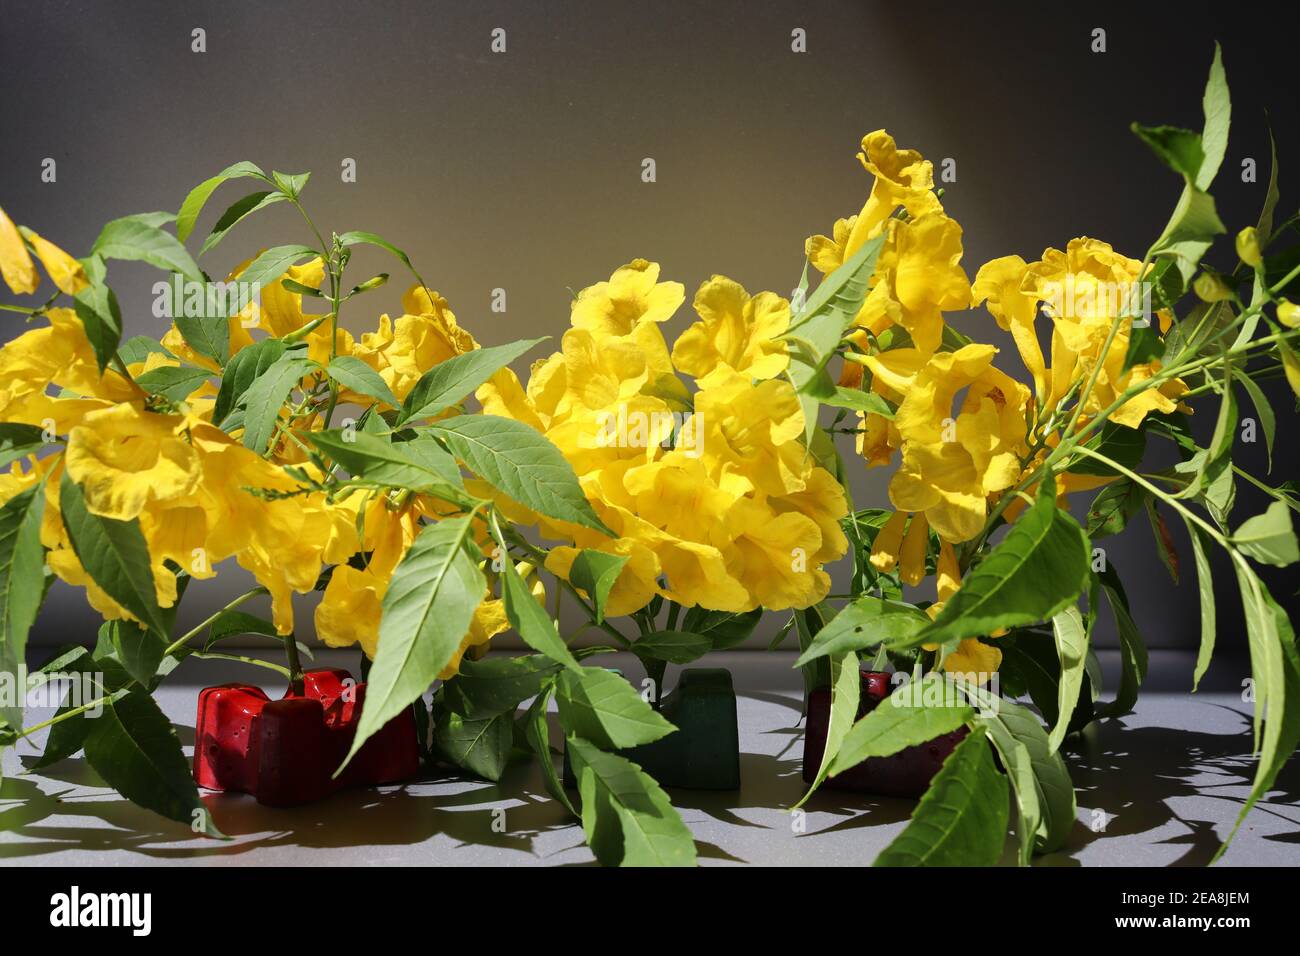 Nature has given real yellow color through these petals of flowers. Stock Photo